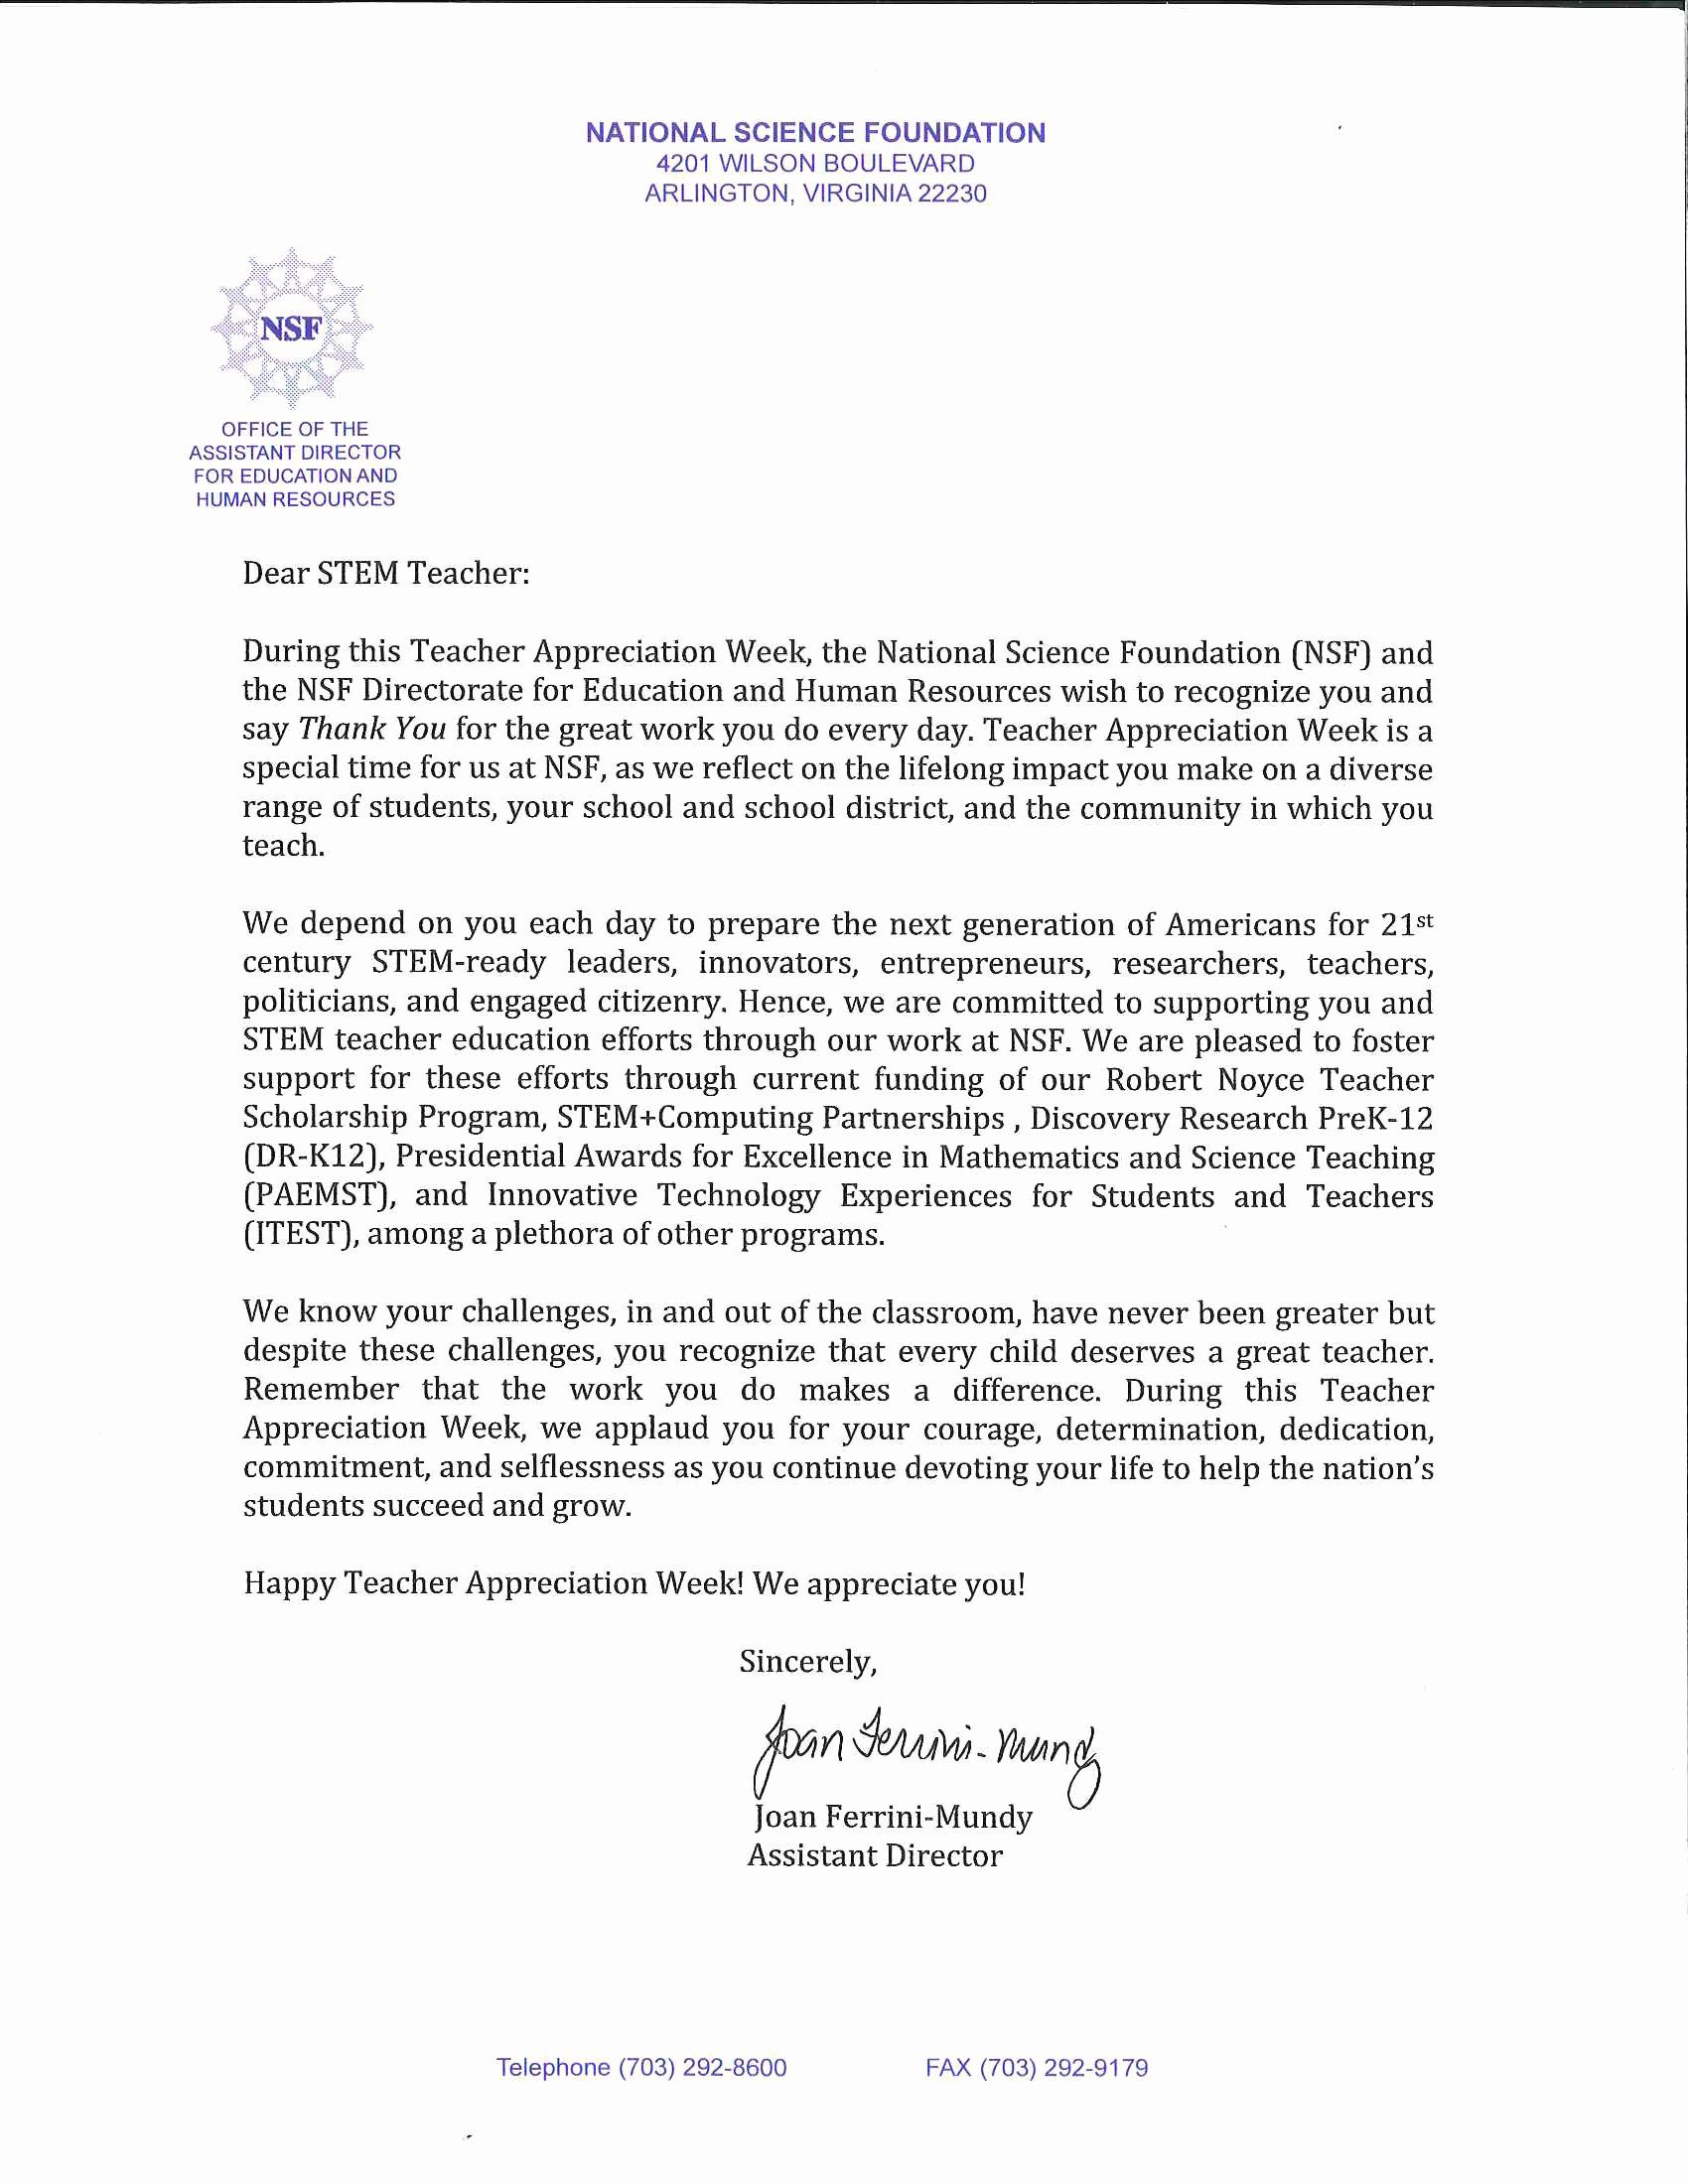 Teacher Appreciation Week A Letter From the Nsf Announce